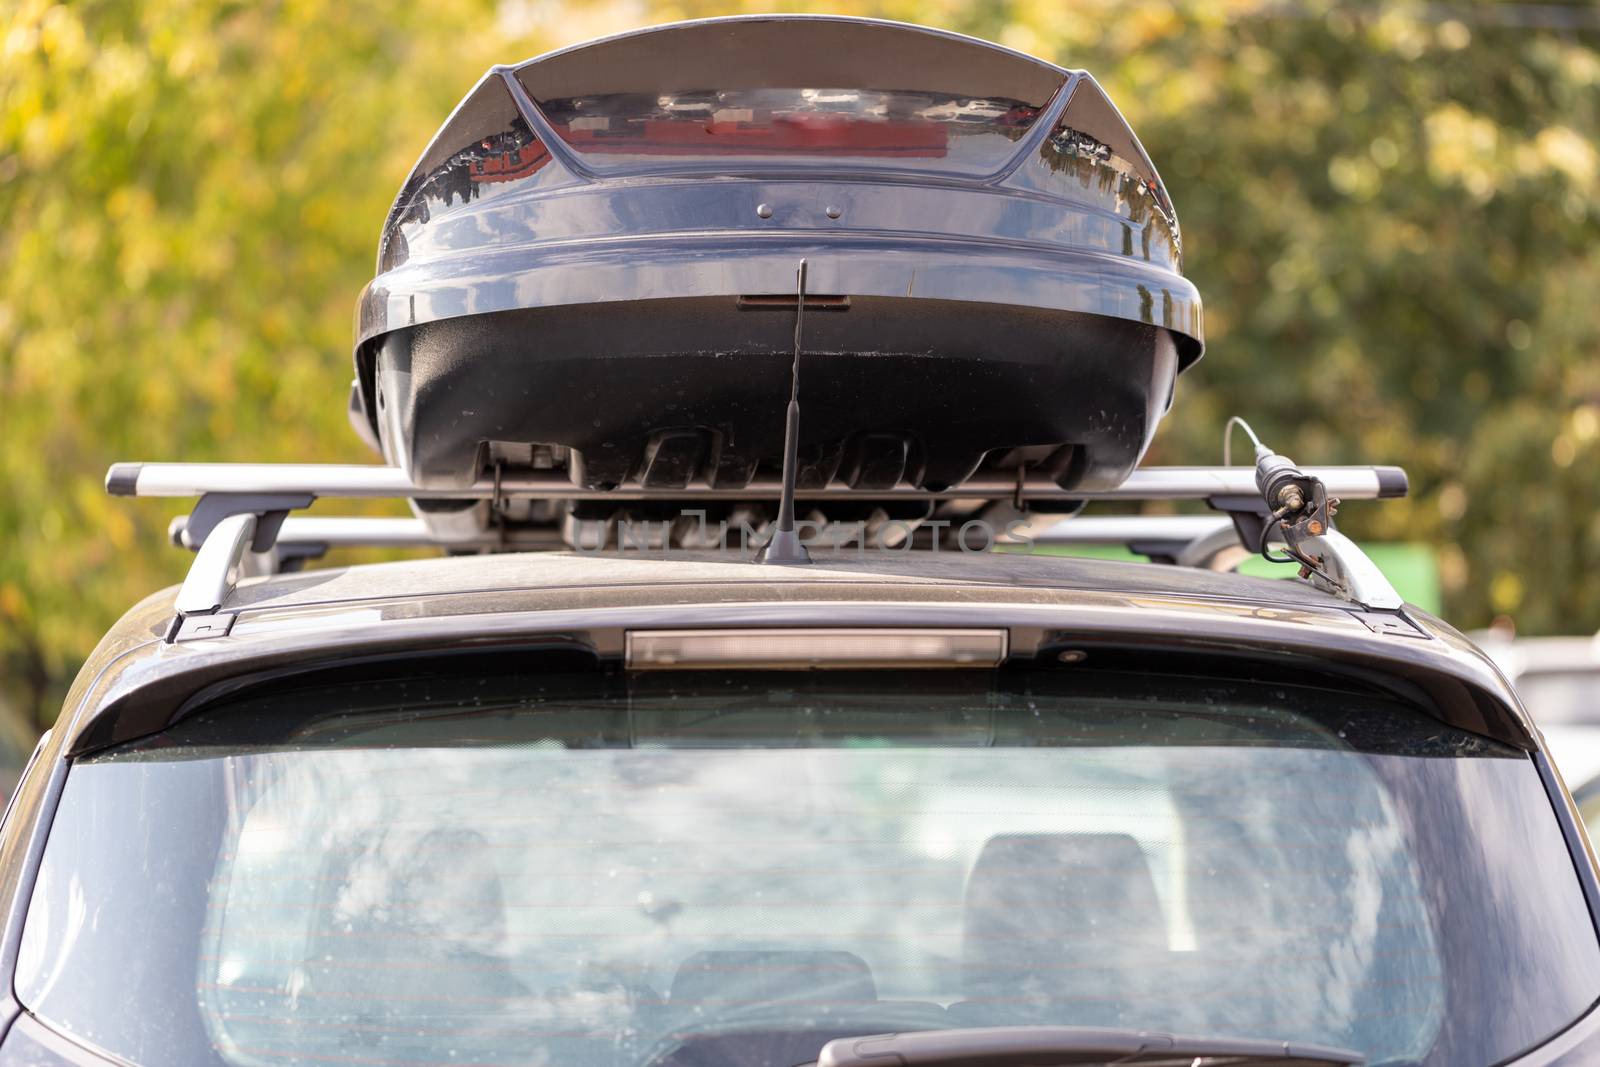 Assembled and closed, roomy roof rack or roof box against a blurred background of green leaves. Back view. by bonilook